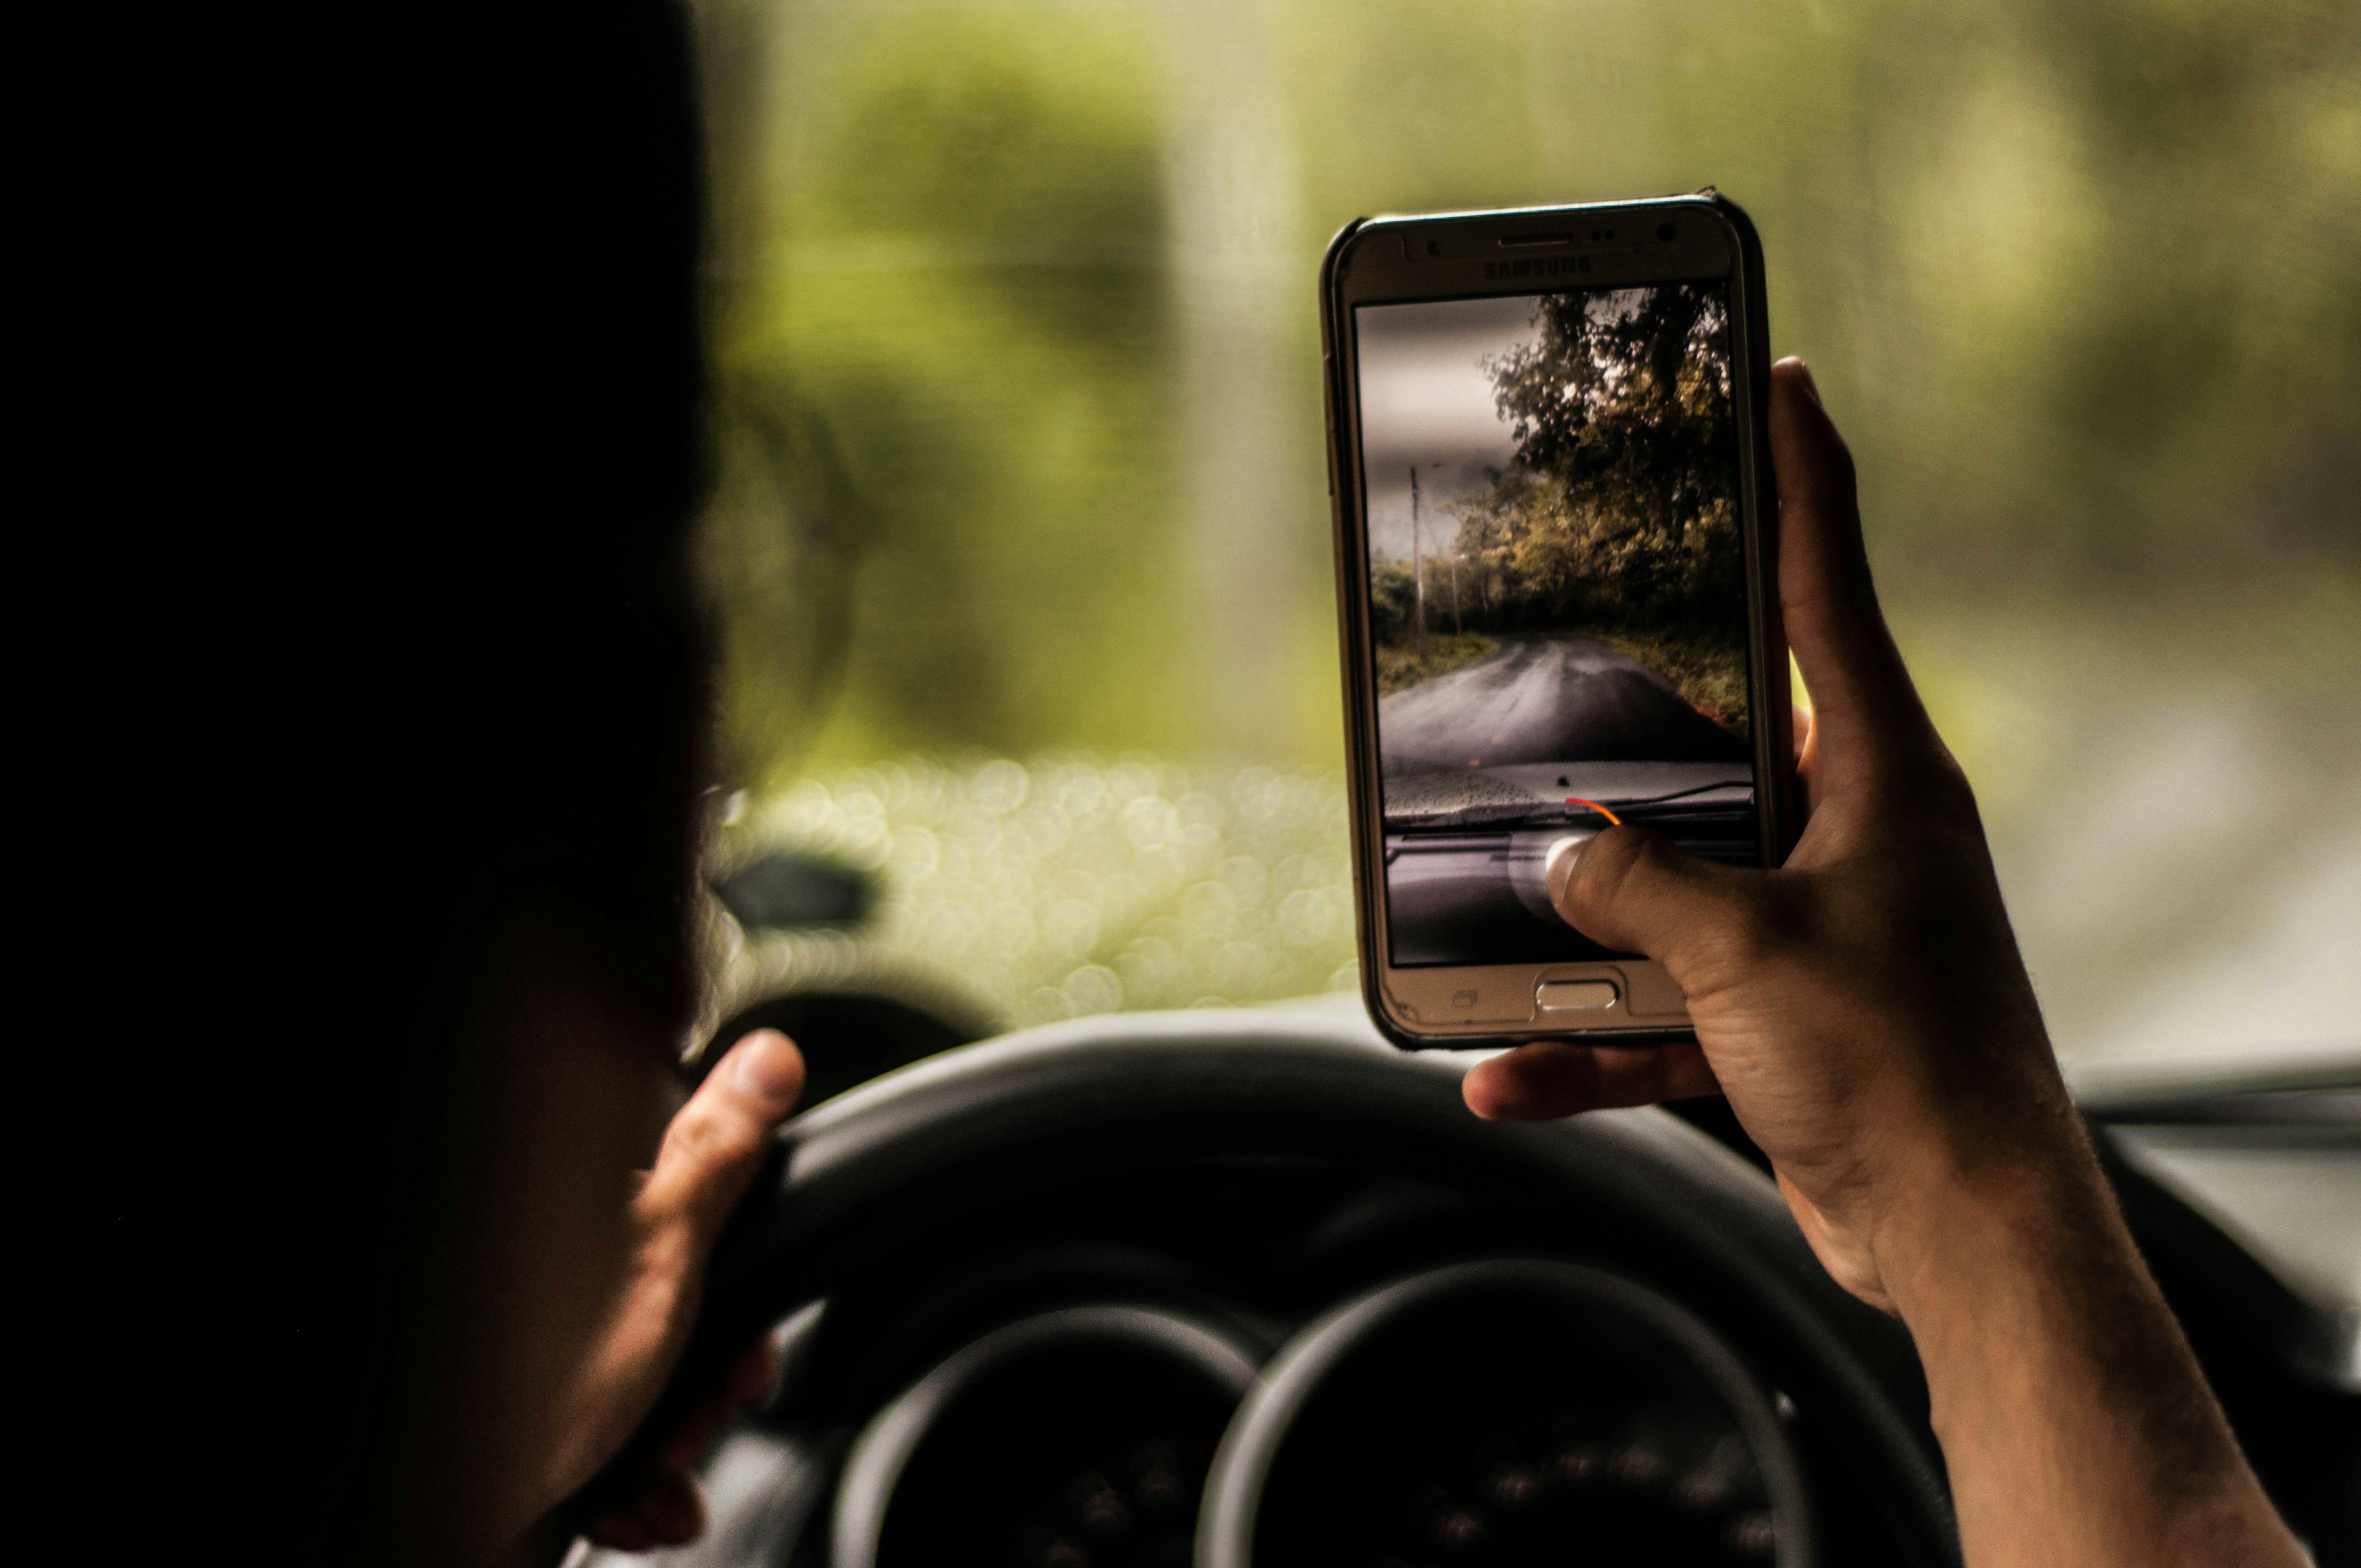 Image of a person taking a photo while driving